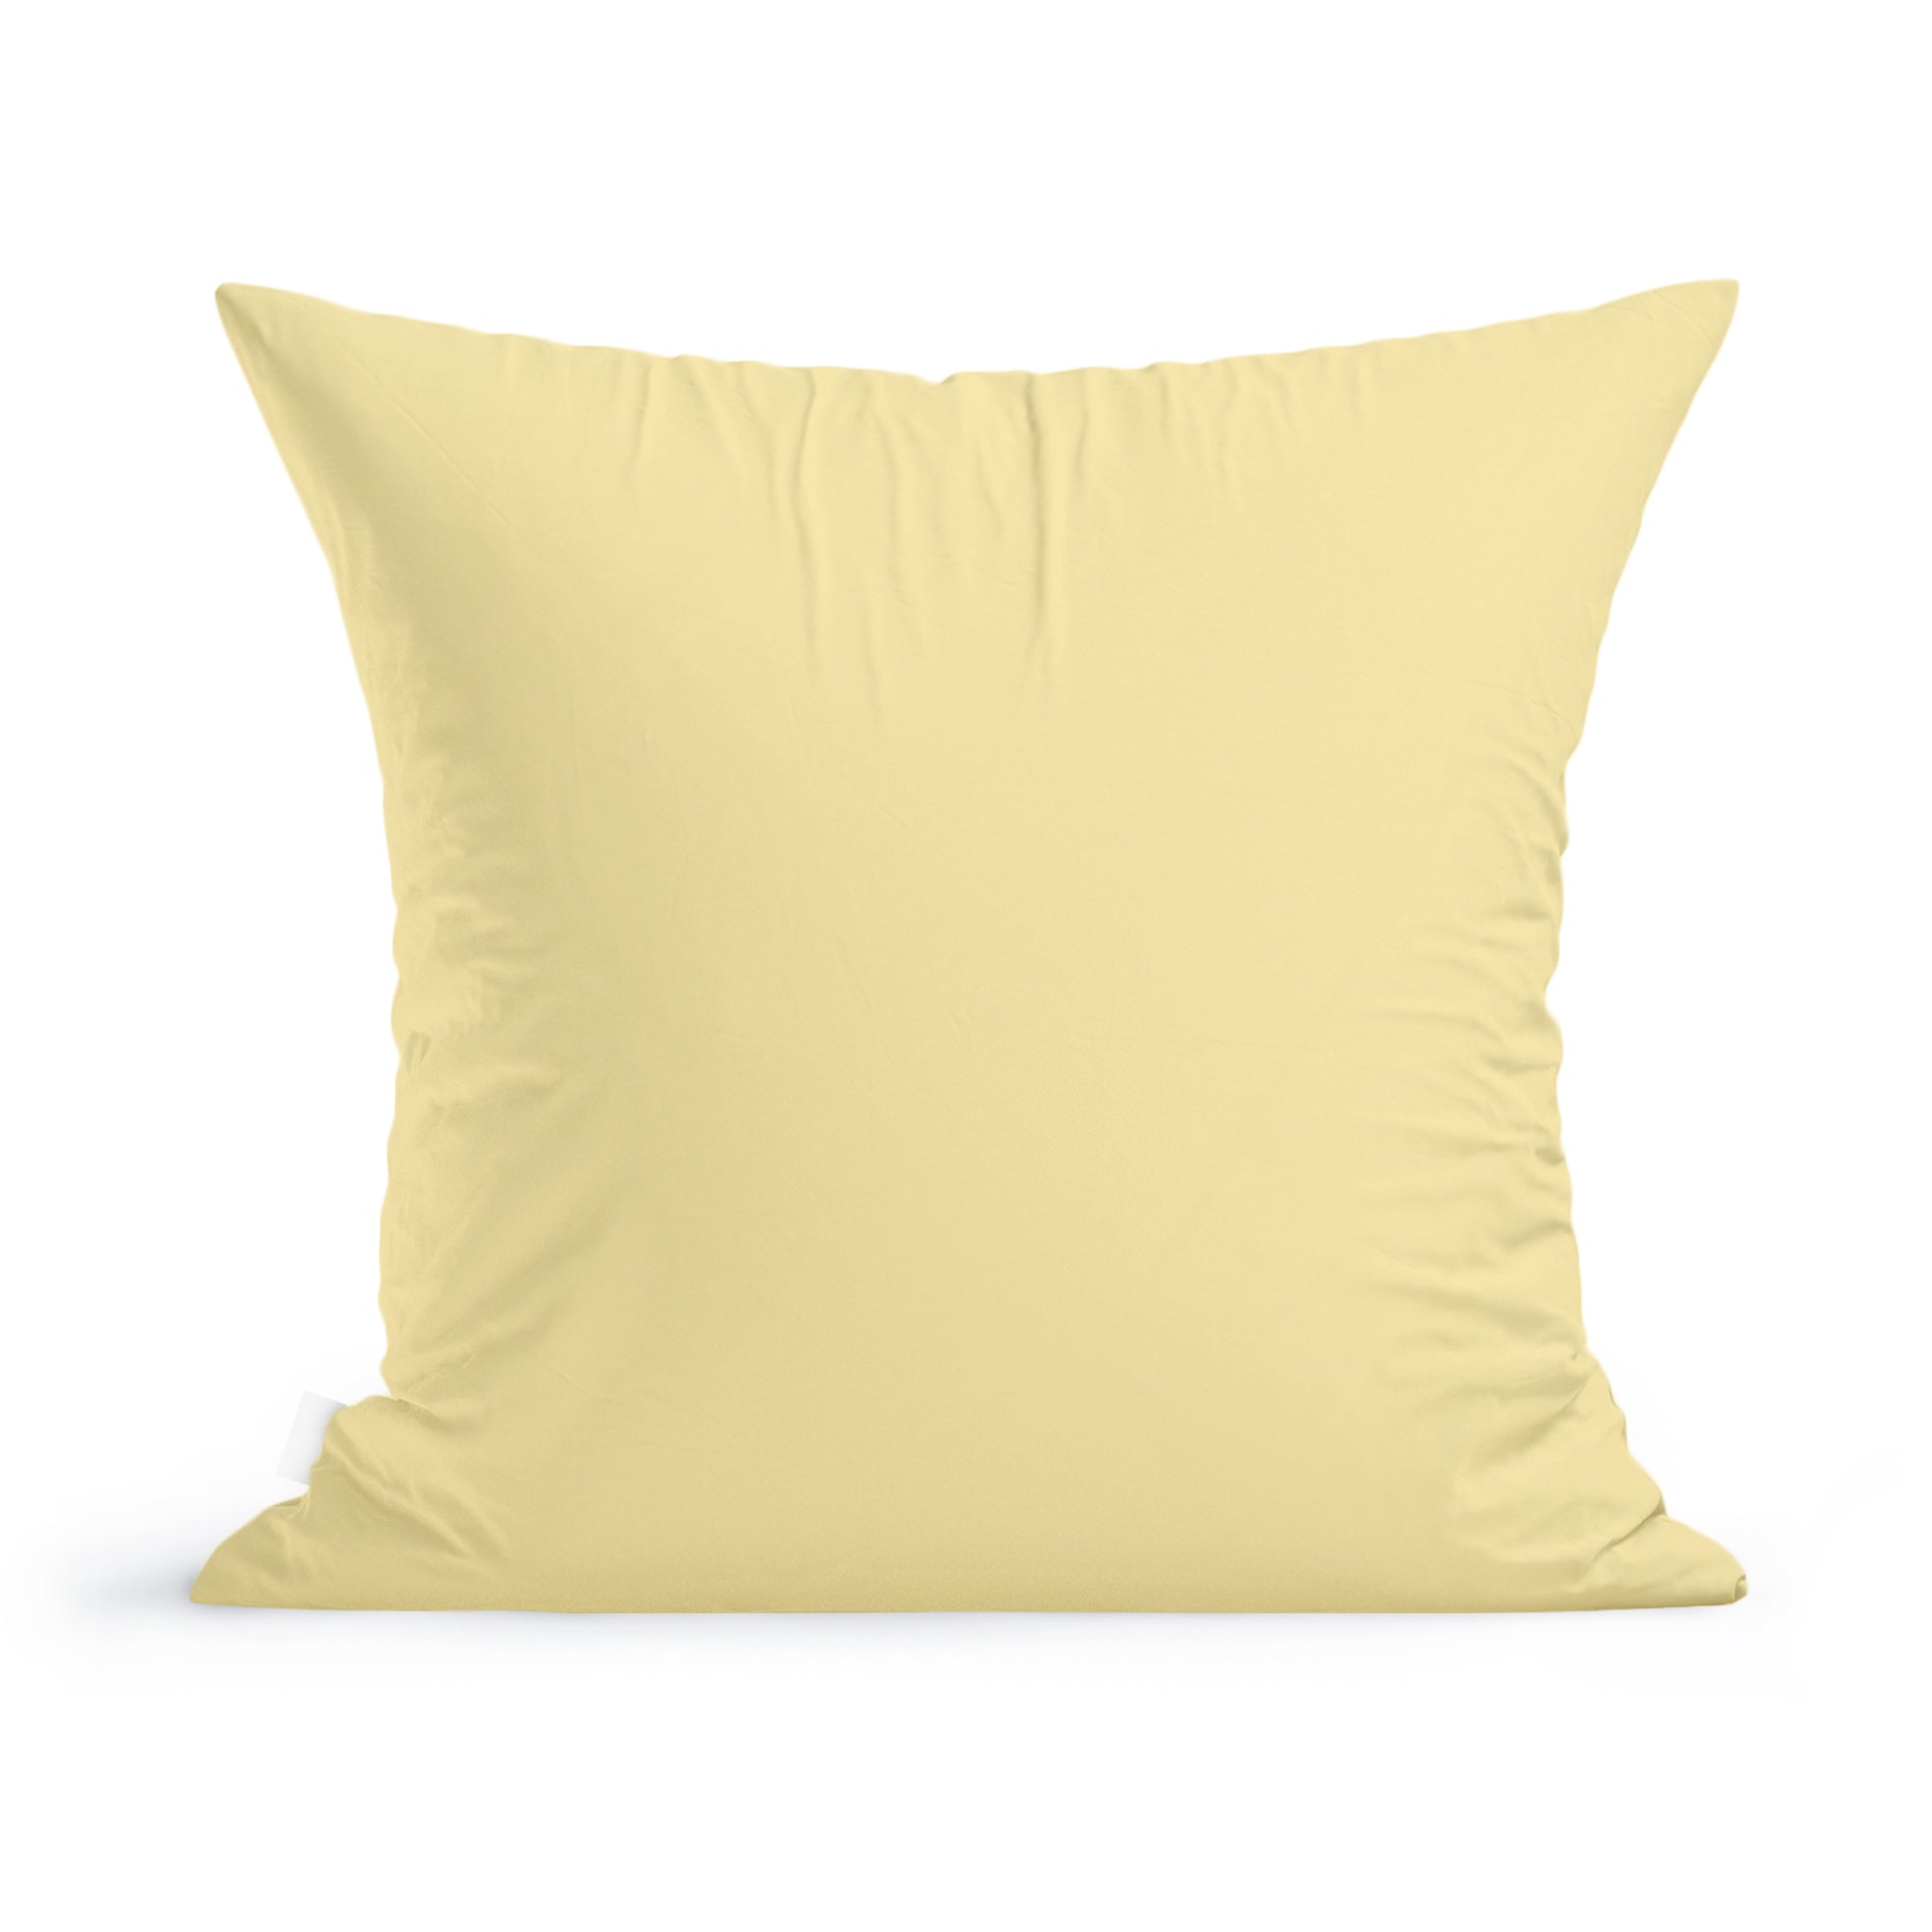 Rustic County's Wild Daisies Pillow on a white background.